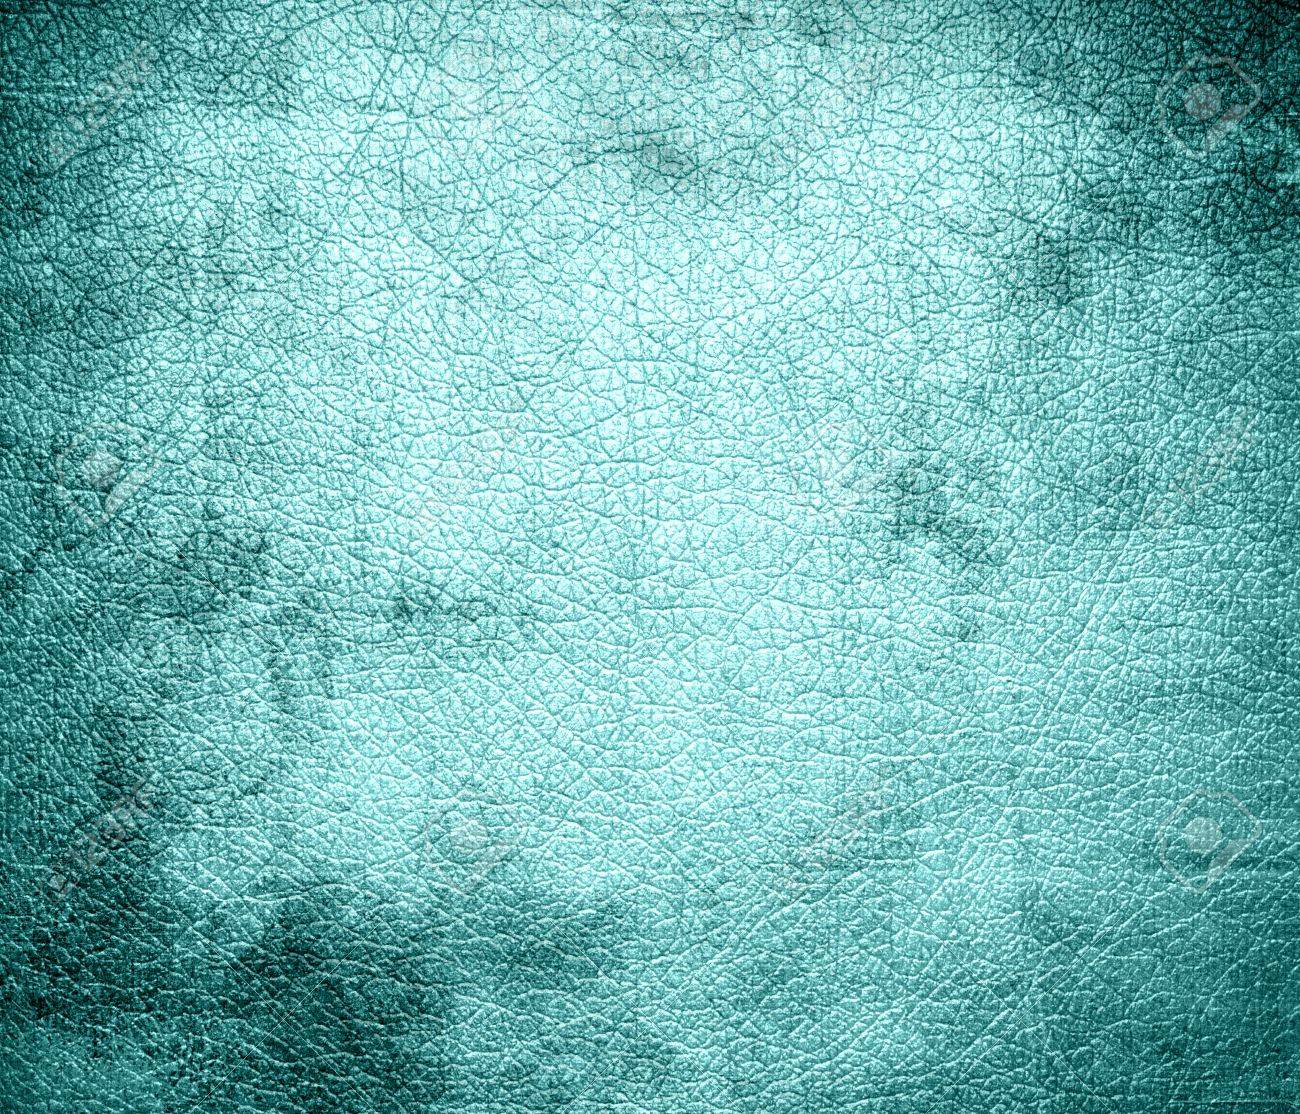 Grunge Background Of Celeste Leather Texture Stock Photo Picture